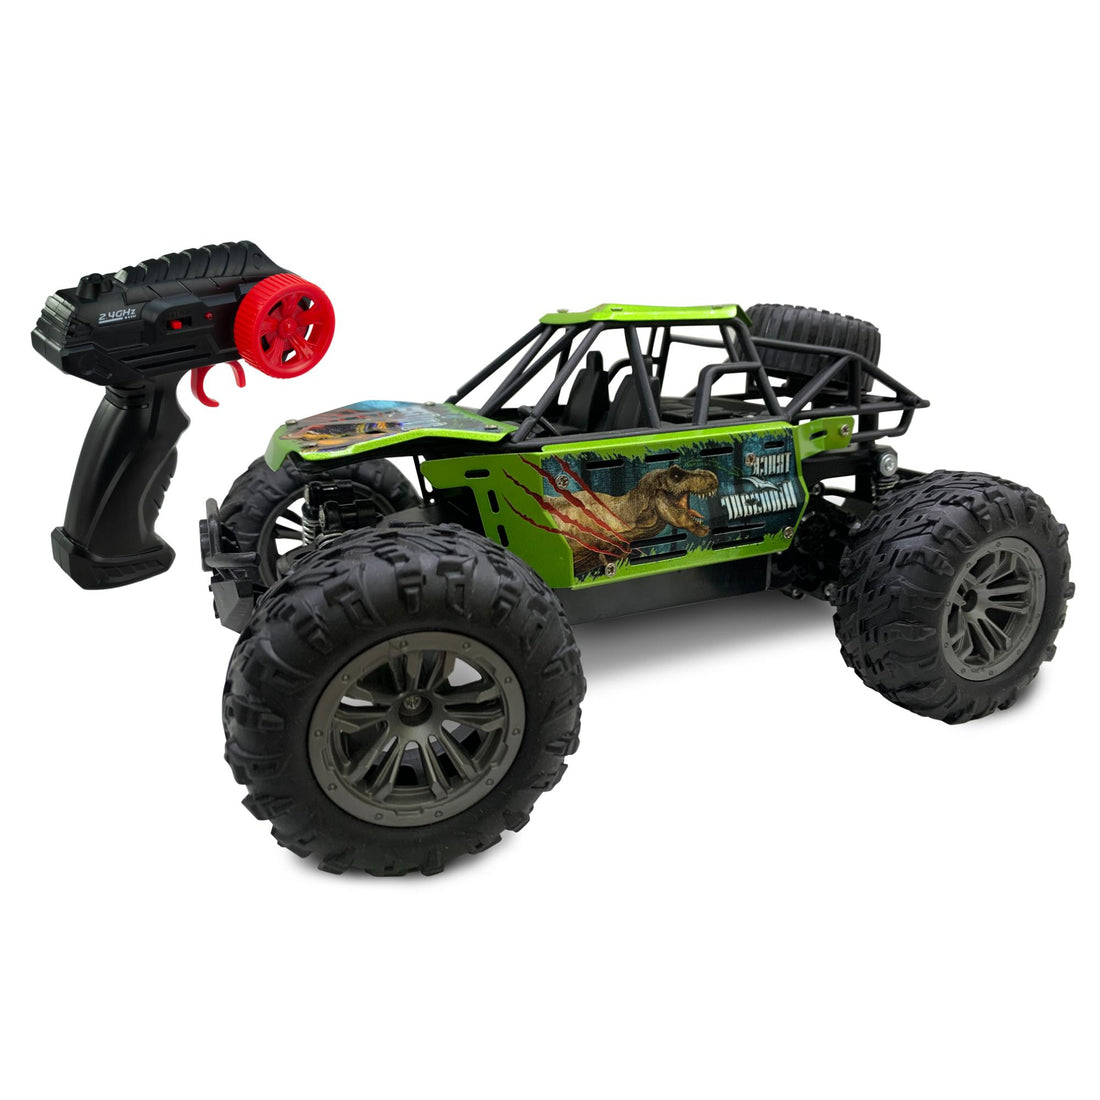 METAL T-REX: Rc 2.4 GHz - Rc 1:16 Scale METAL CARBODY  - with shock absorbers - differential - front and rear bumpers - with lithium battery pack + USB charging cable + batteries for the transmitter included